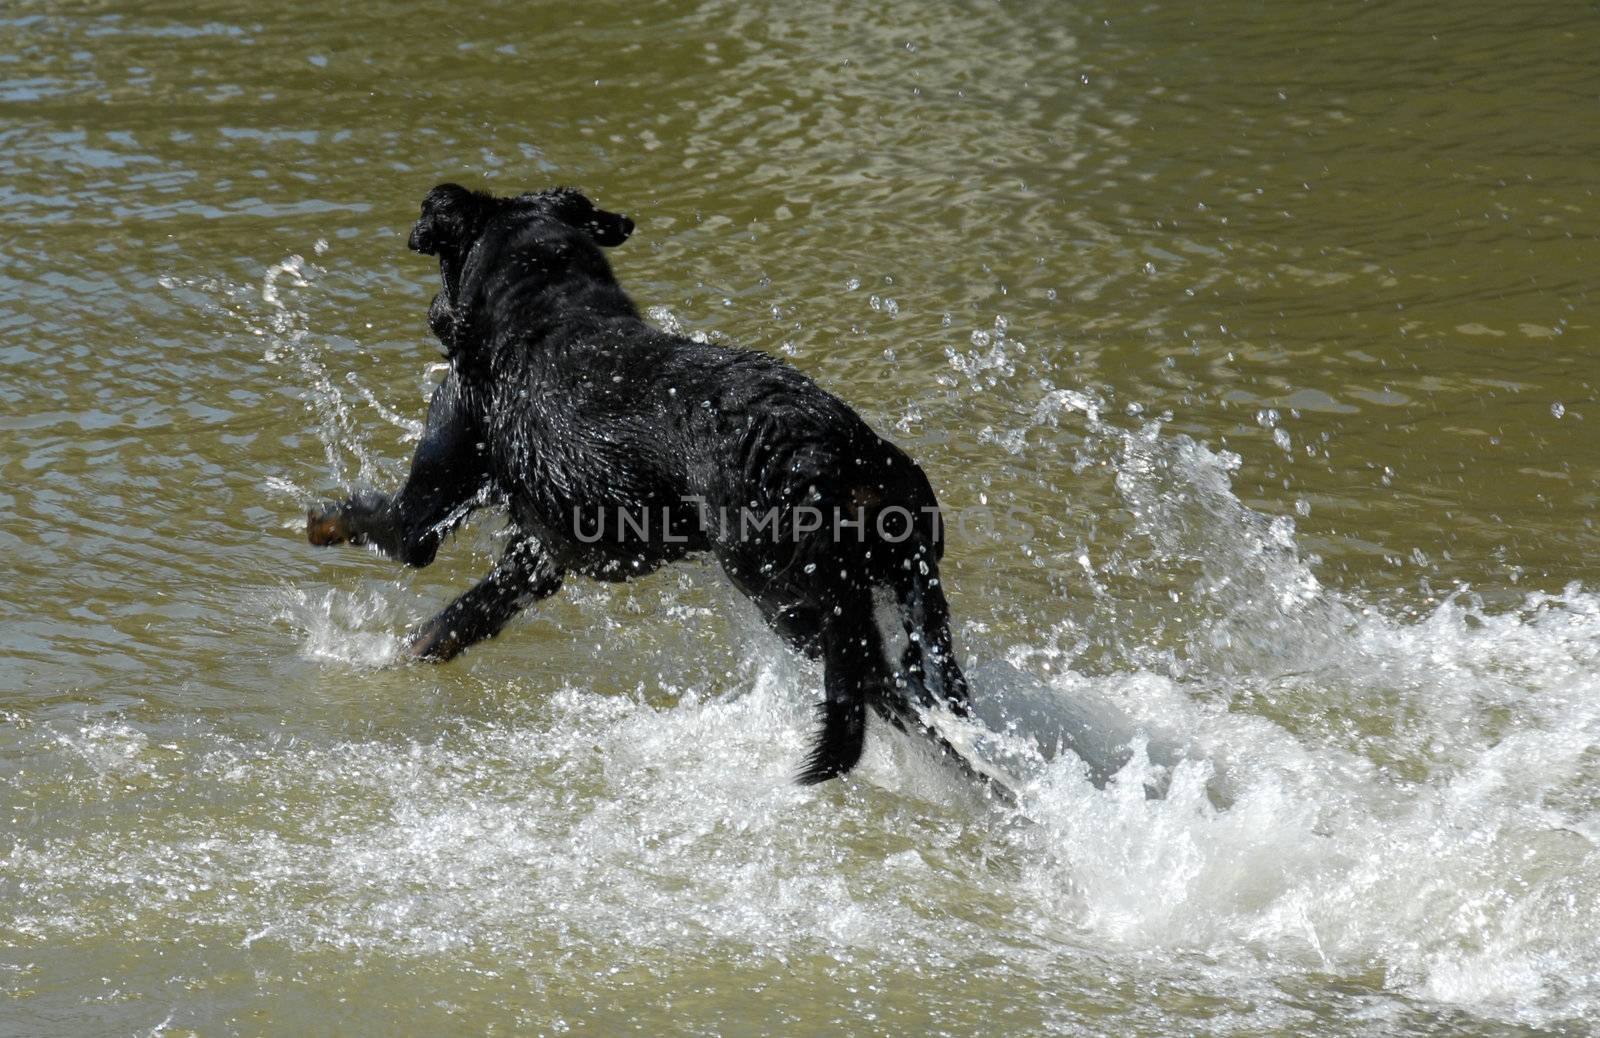 swimming  purebred french shepherd "beauceron" in a lake